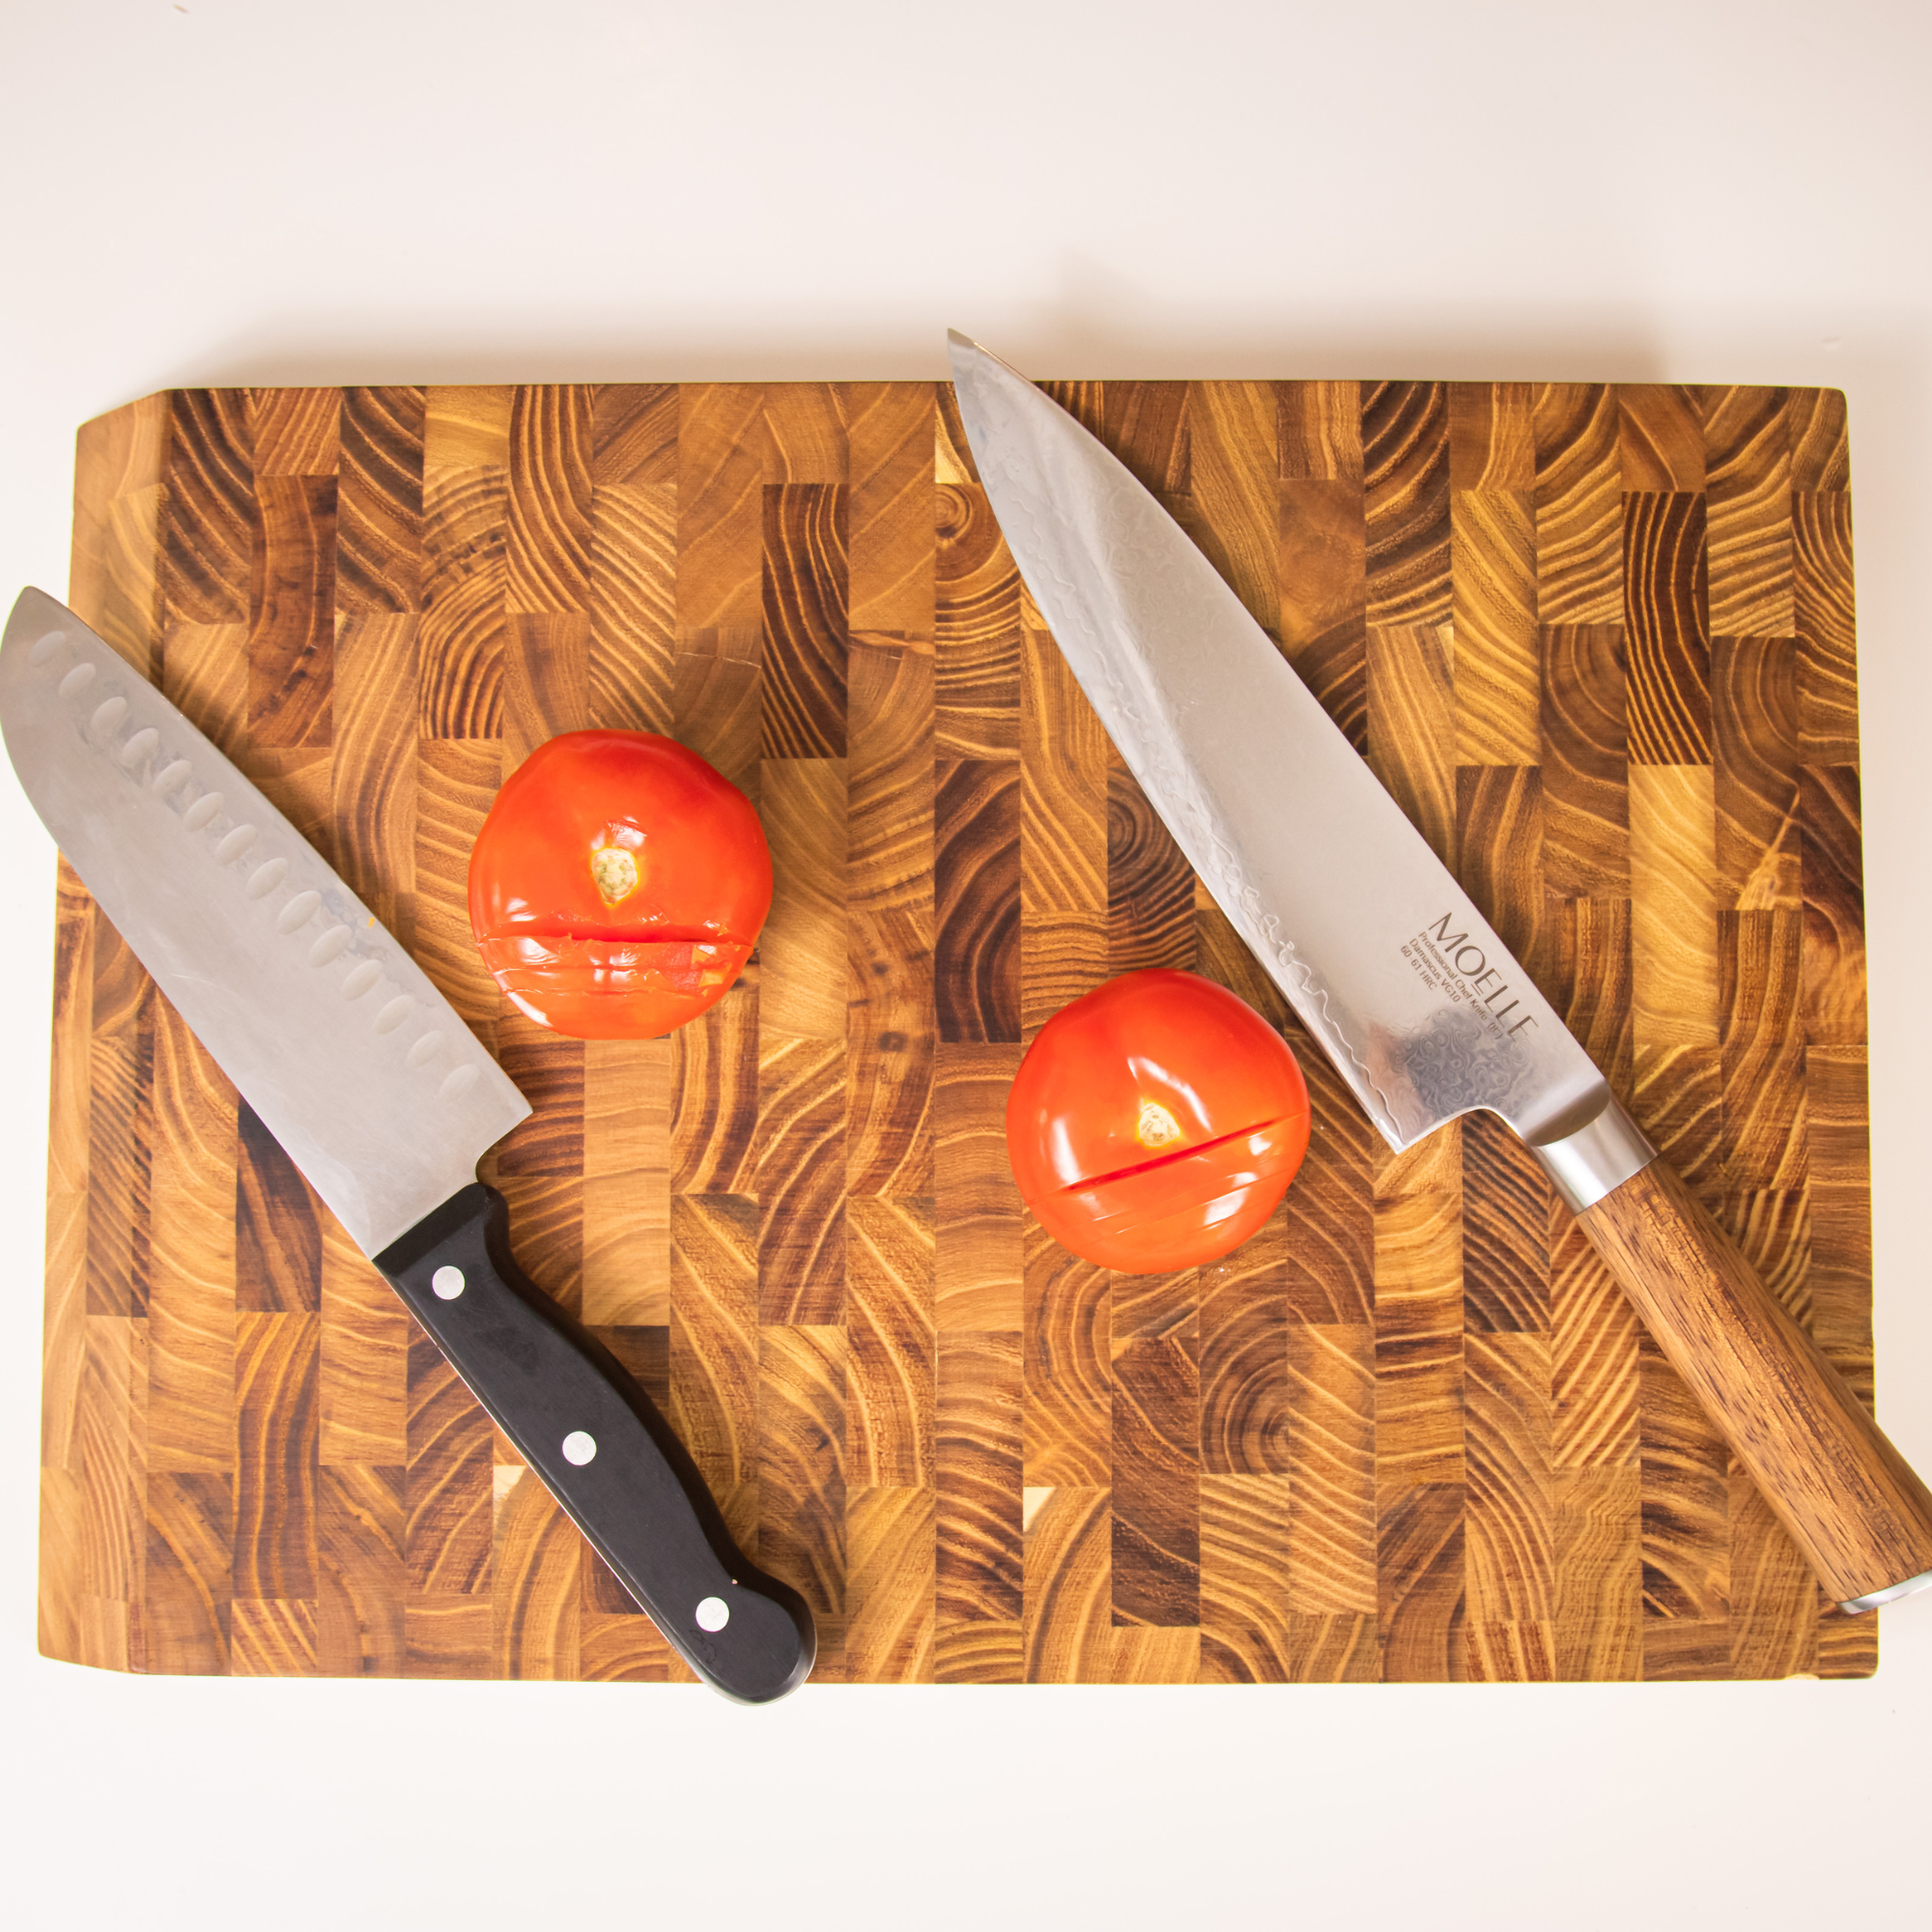 Unusual Methods for Honing and Sharpening Knives